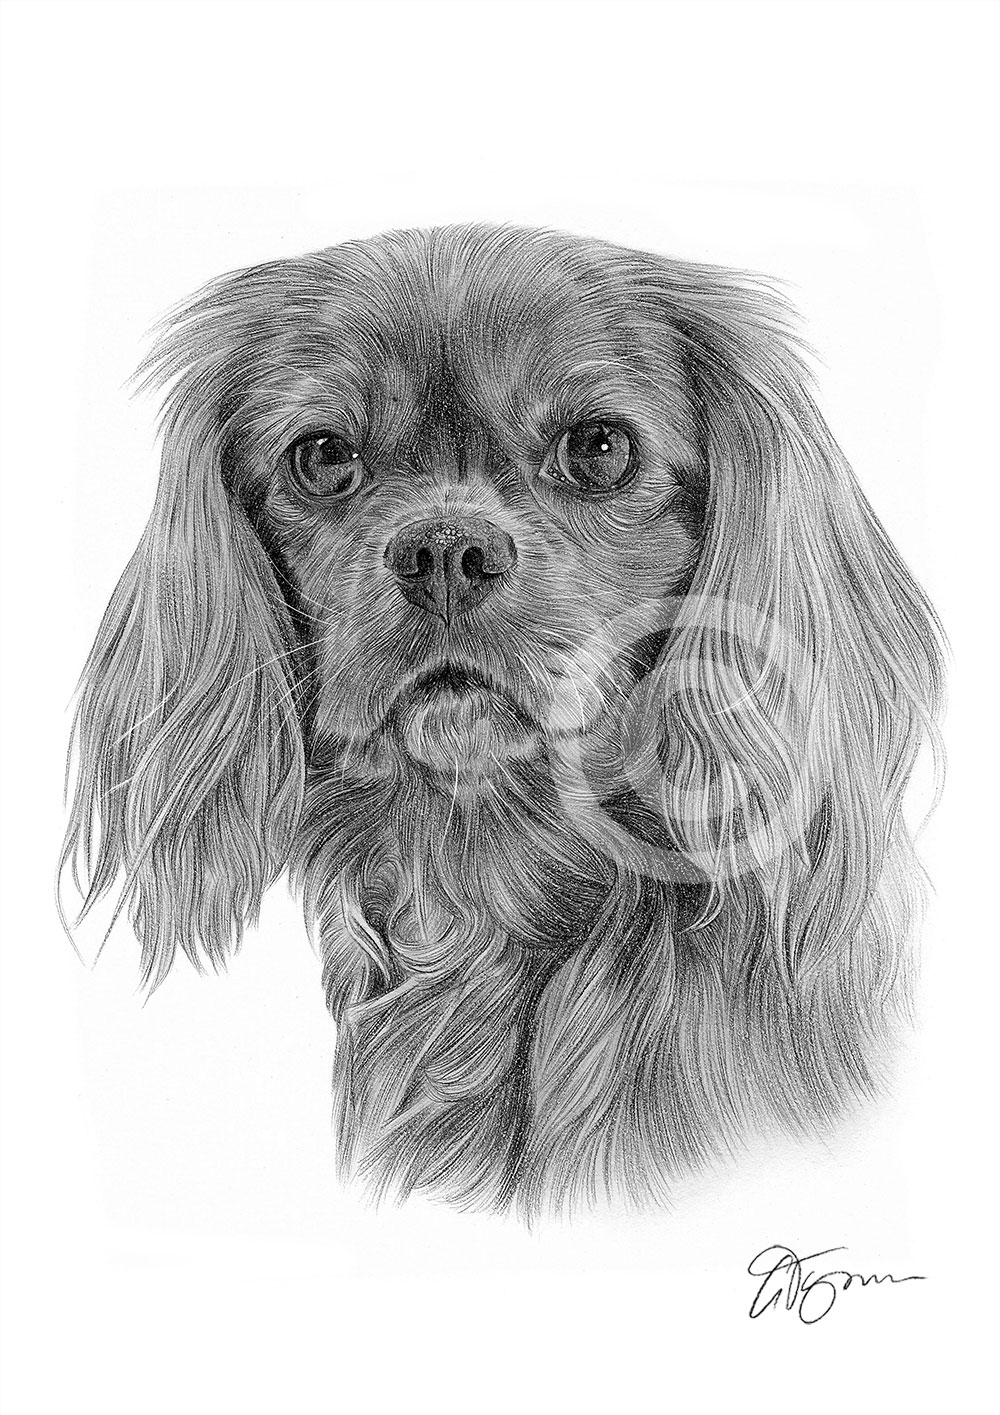 Pencil drawing of a King Charles Spaniel by artist Gary Tymon